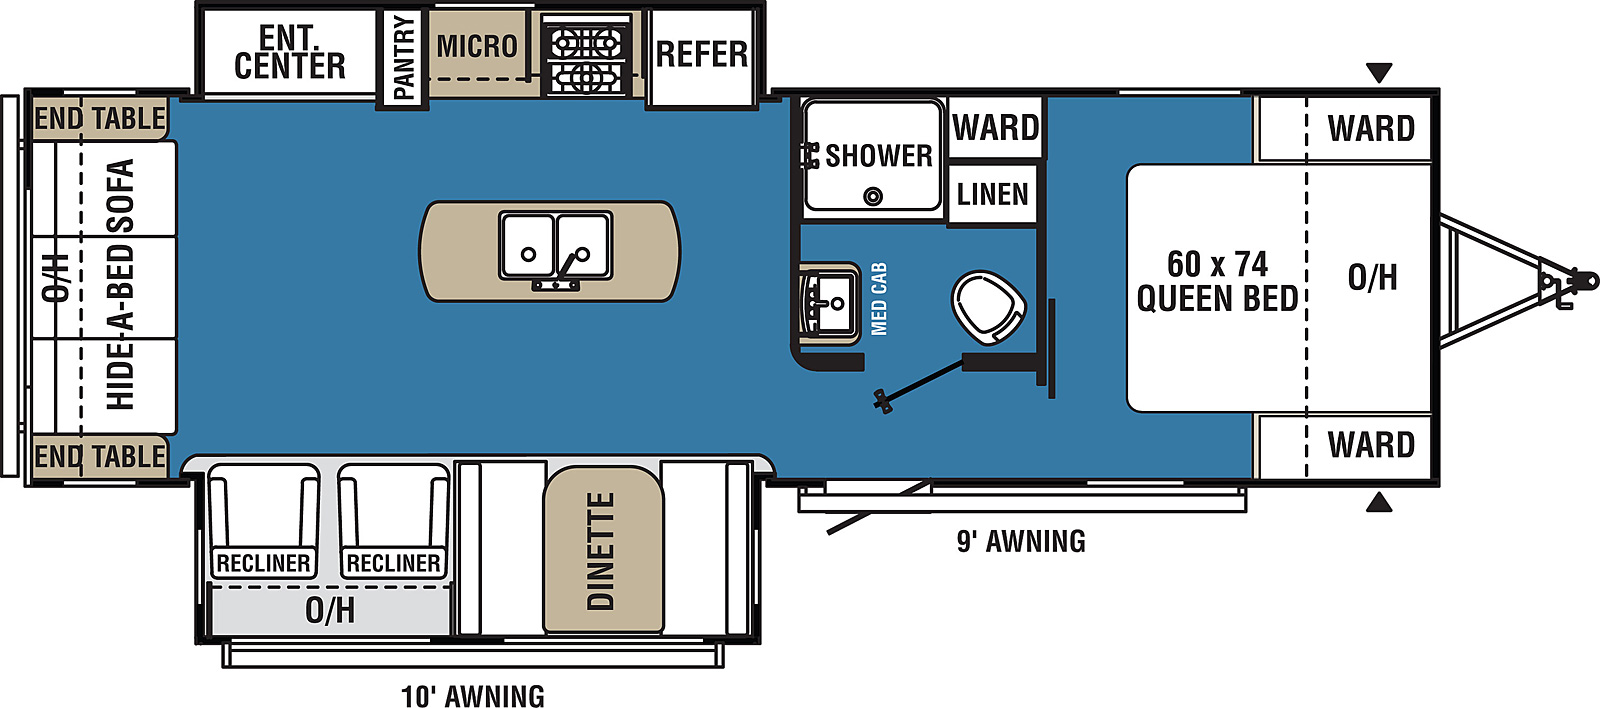 Clipper Ultra-Lite 28RLDS floorplan. The 28RLDS has 2 slide outs and one entry door.